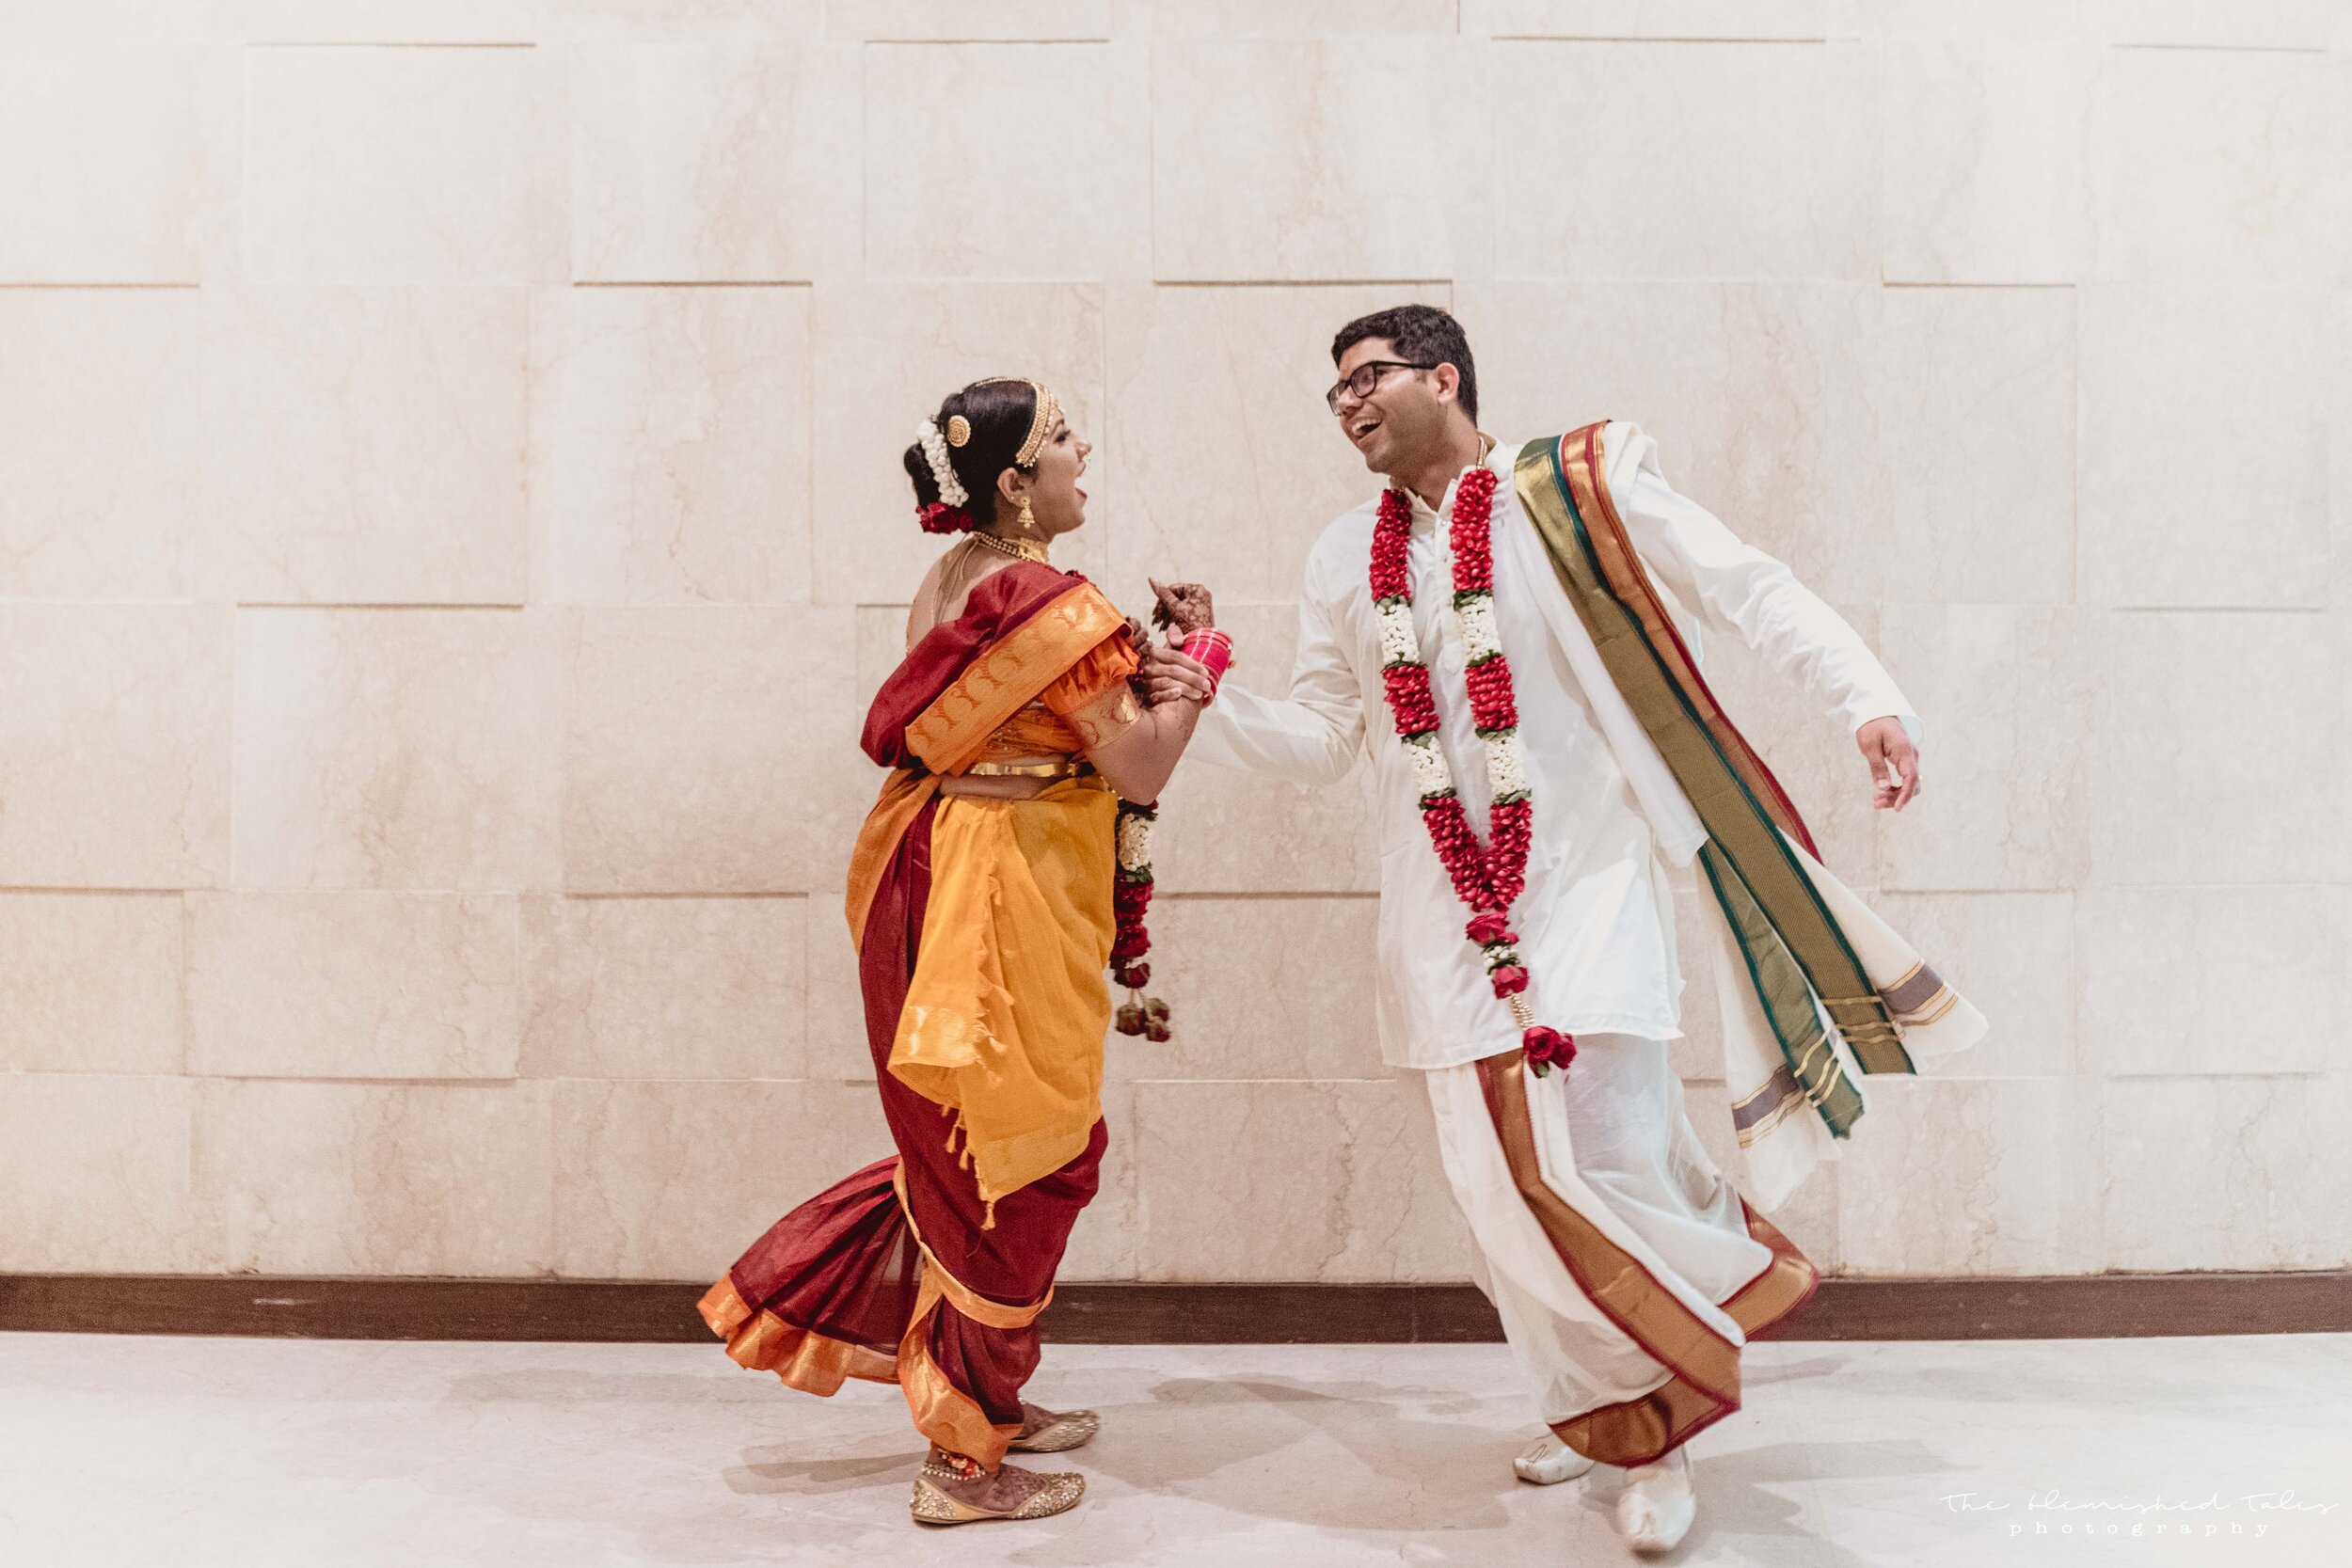 Sanchit and Harini were clearly a little too much excited after their wedding